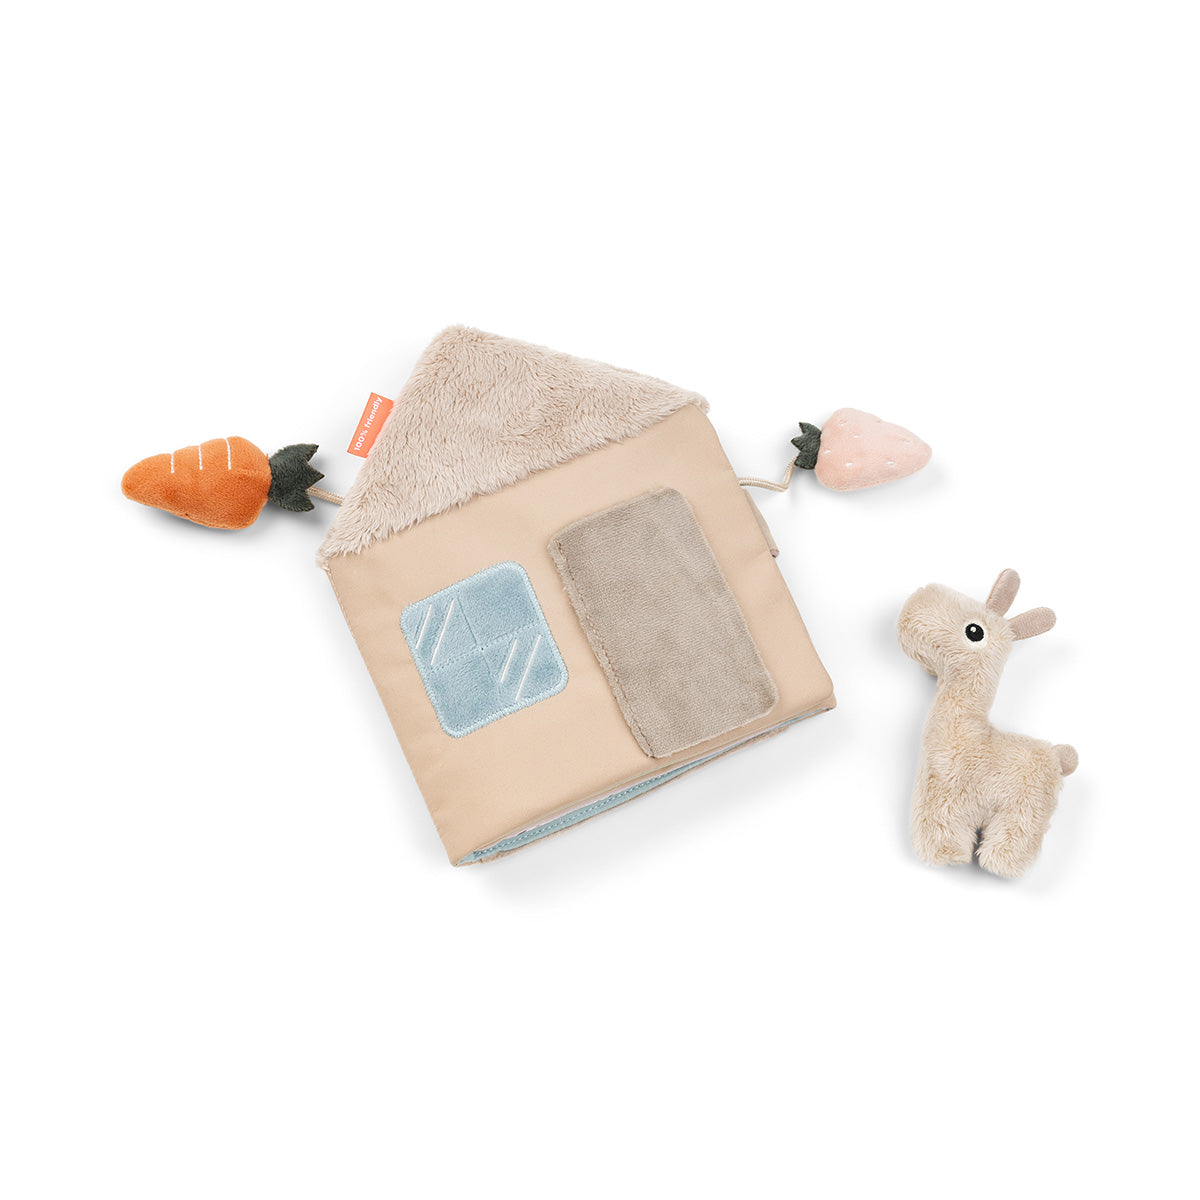 Done By Deer – BORN  Baby & Kids Concept Store